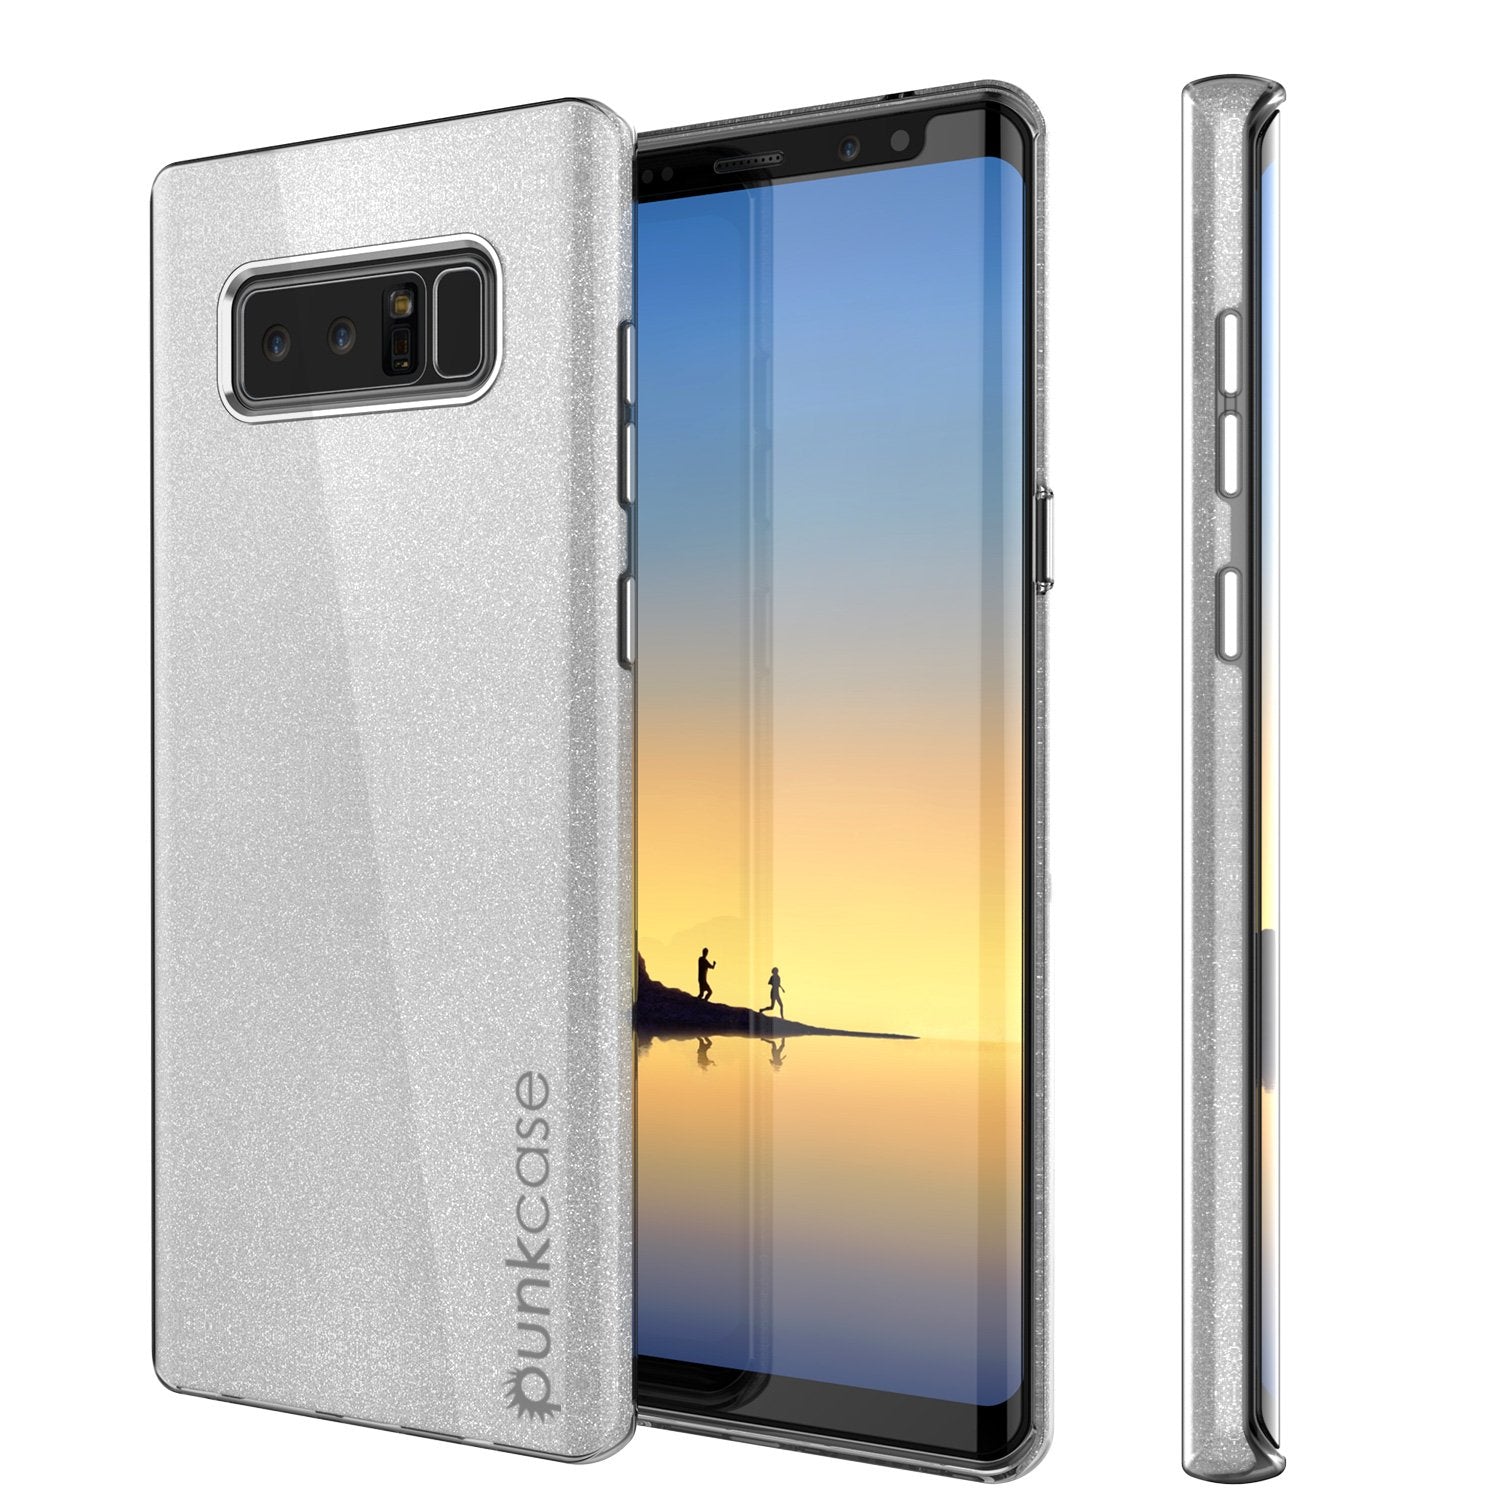 Galaxy Note 8 Case, Punkcase Galactic 2.0 Series Ultra Slim [Silver]